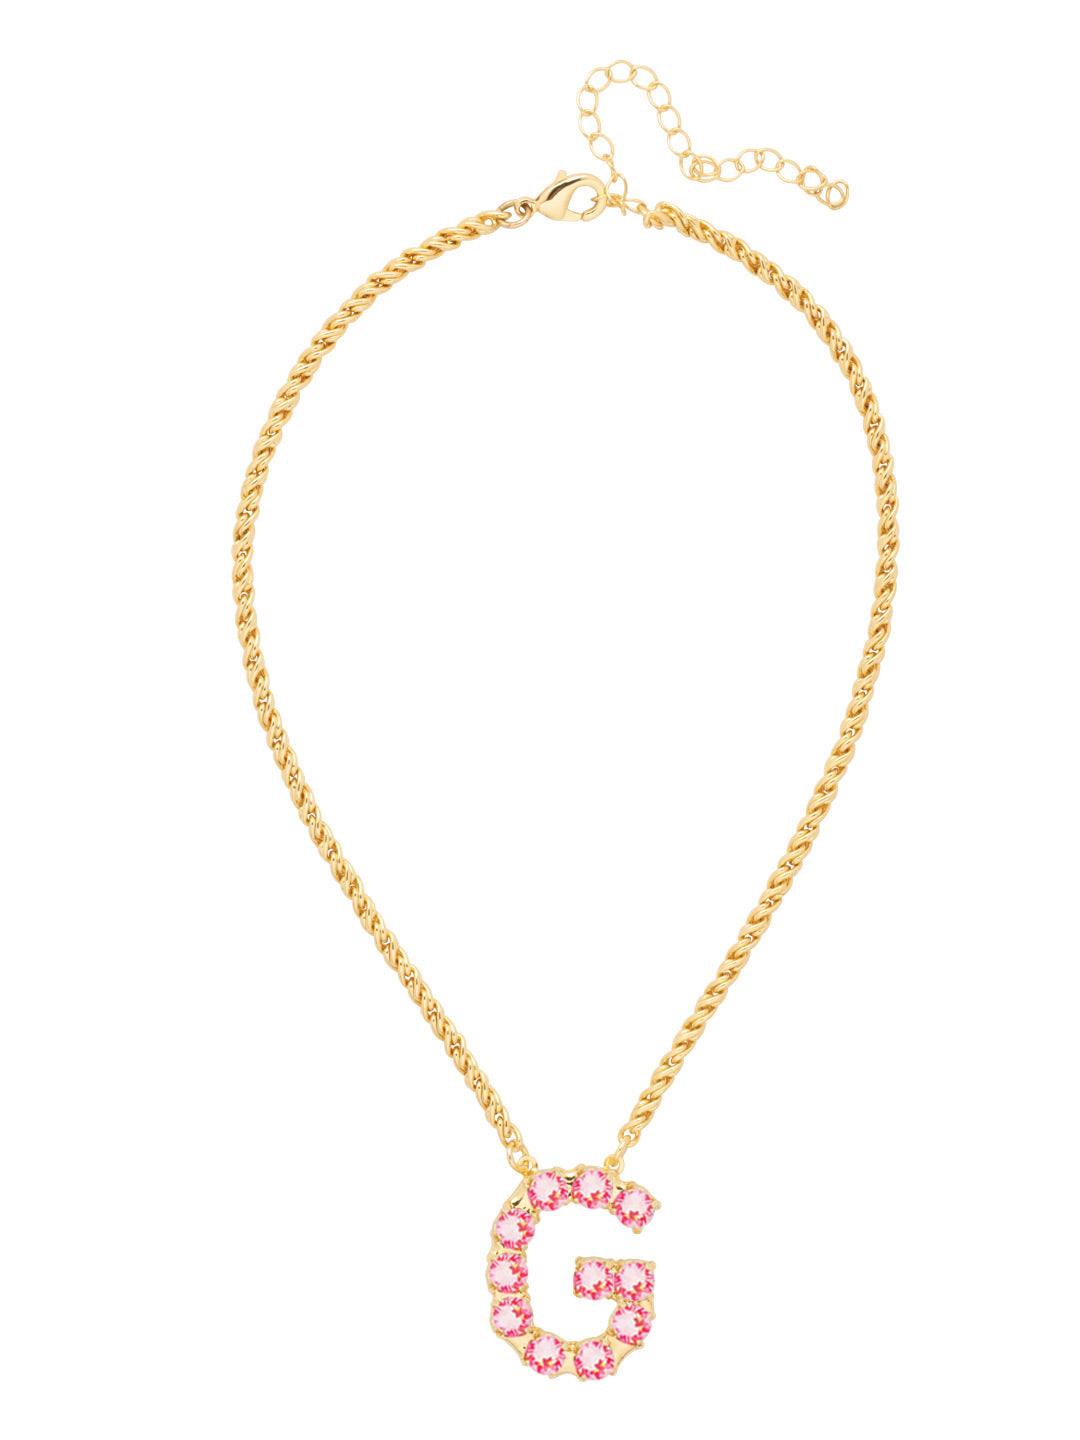 G Initial Rope Pendant Necklace - NFK26BGETP - <p>The Initial Rope Pendant Necklace features a crystal encrusted metal monogram pendant on an adjustable rope chain, secured with a lobster claw clasp. From Sorrelli's Electric Pink collection in our Bright Gold-tone finish.</p>